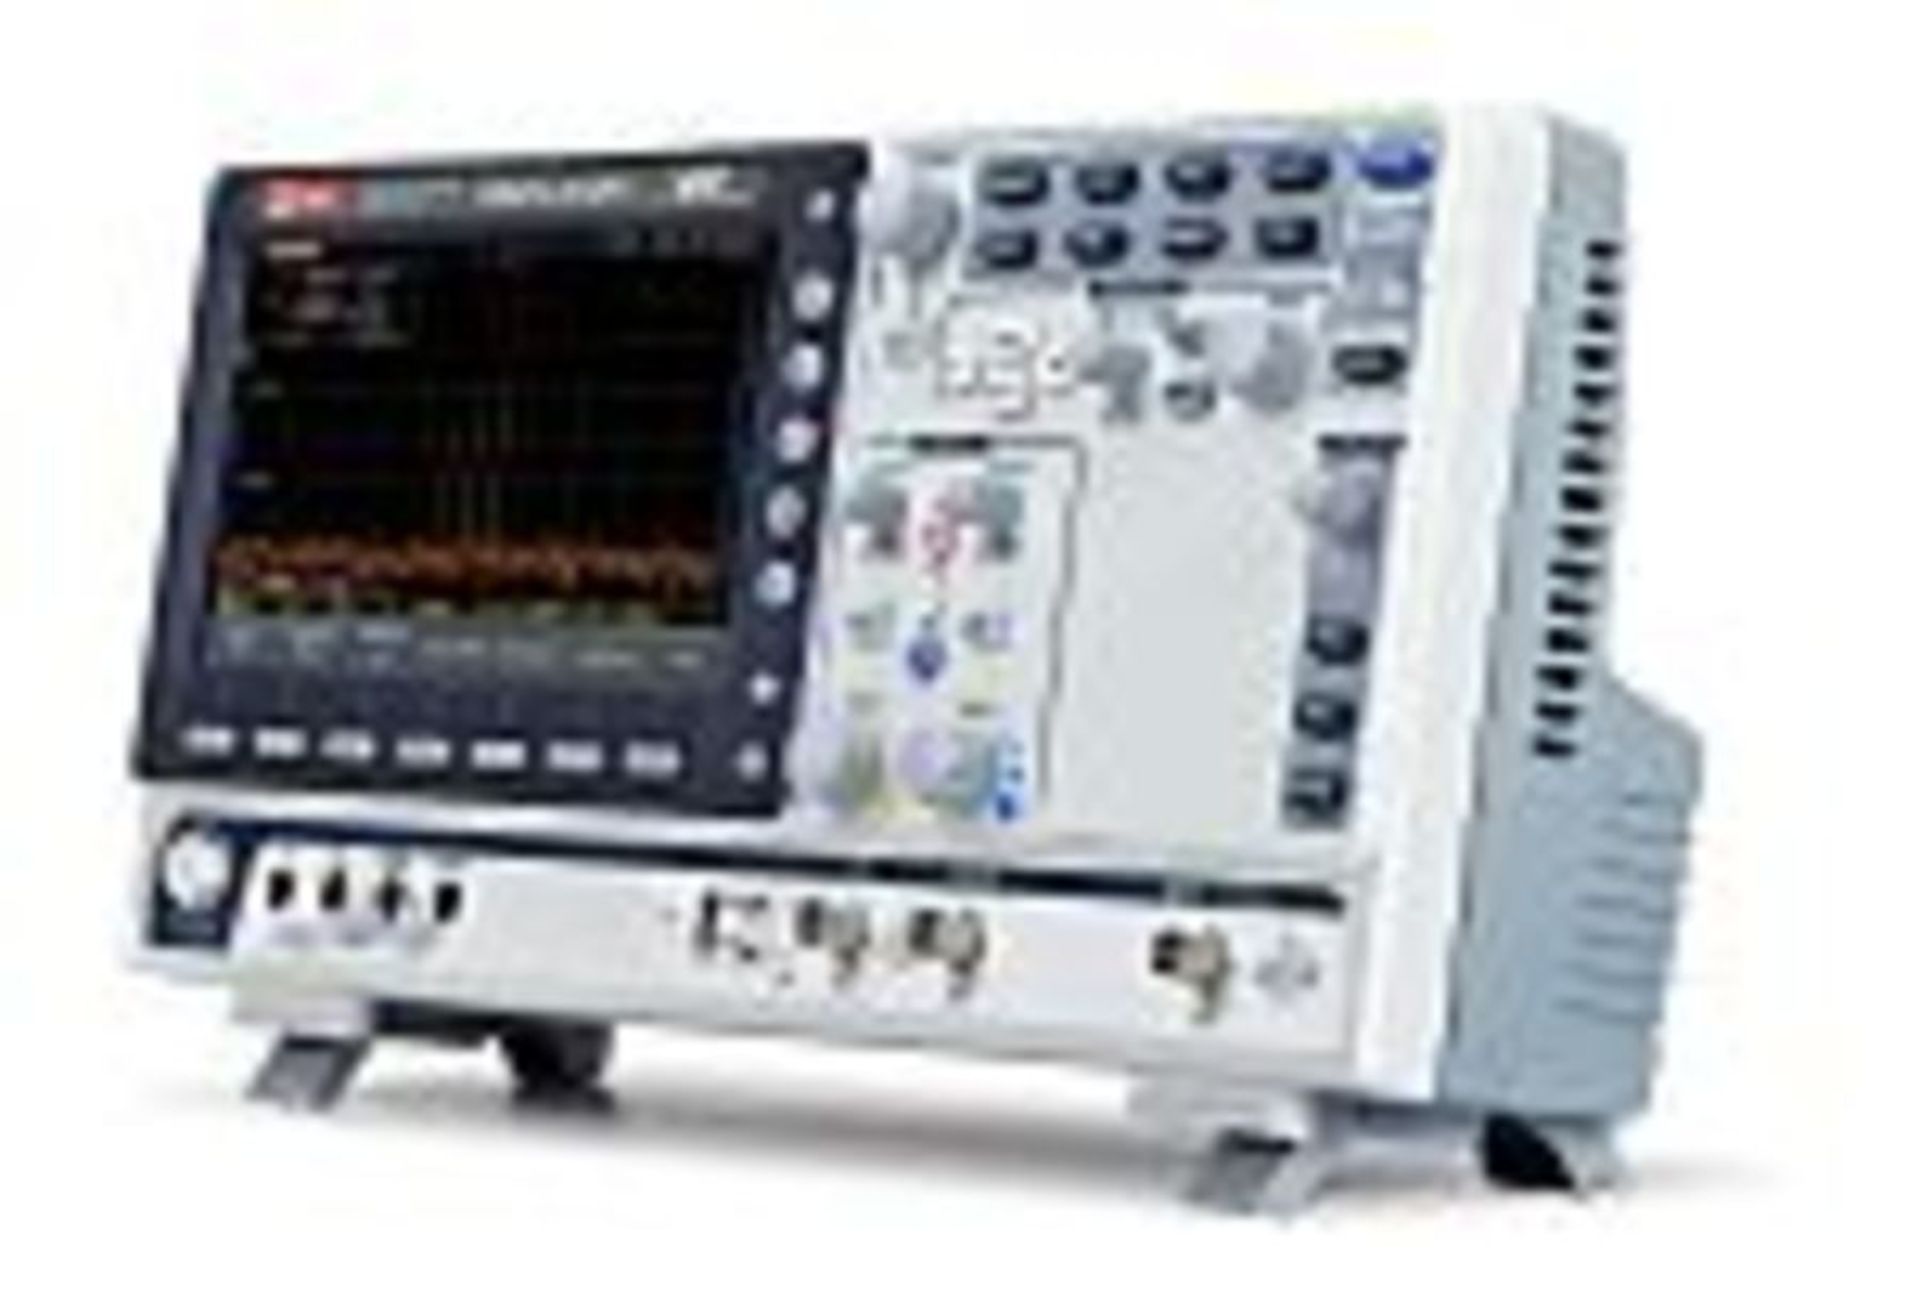 RS PRO RSMDO-2202EX Bench Mixed Domain Oscilloscope, 200MHz, 2 Channels - Image 2 of 2